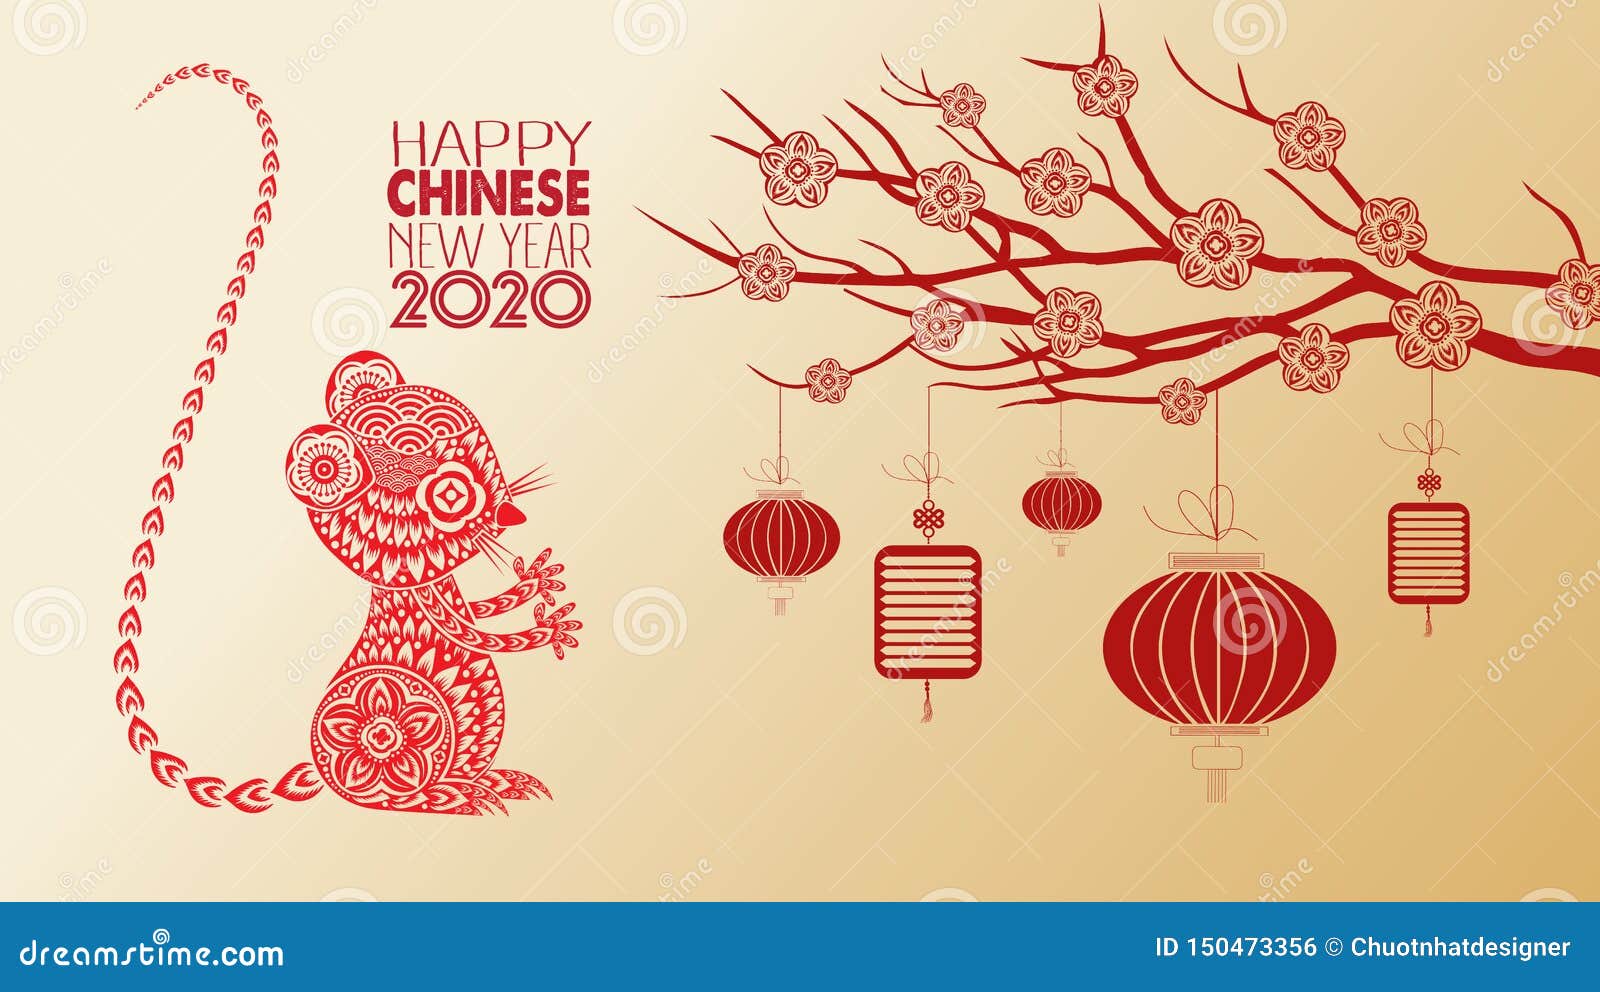 Beautiful Happy New Year 2020 Wallpapers. Year of the Rat Stock ...